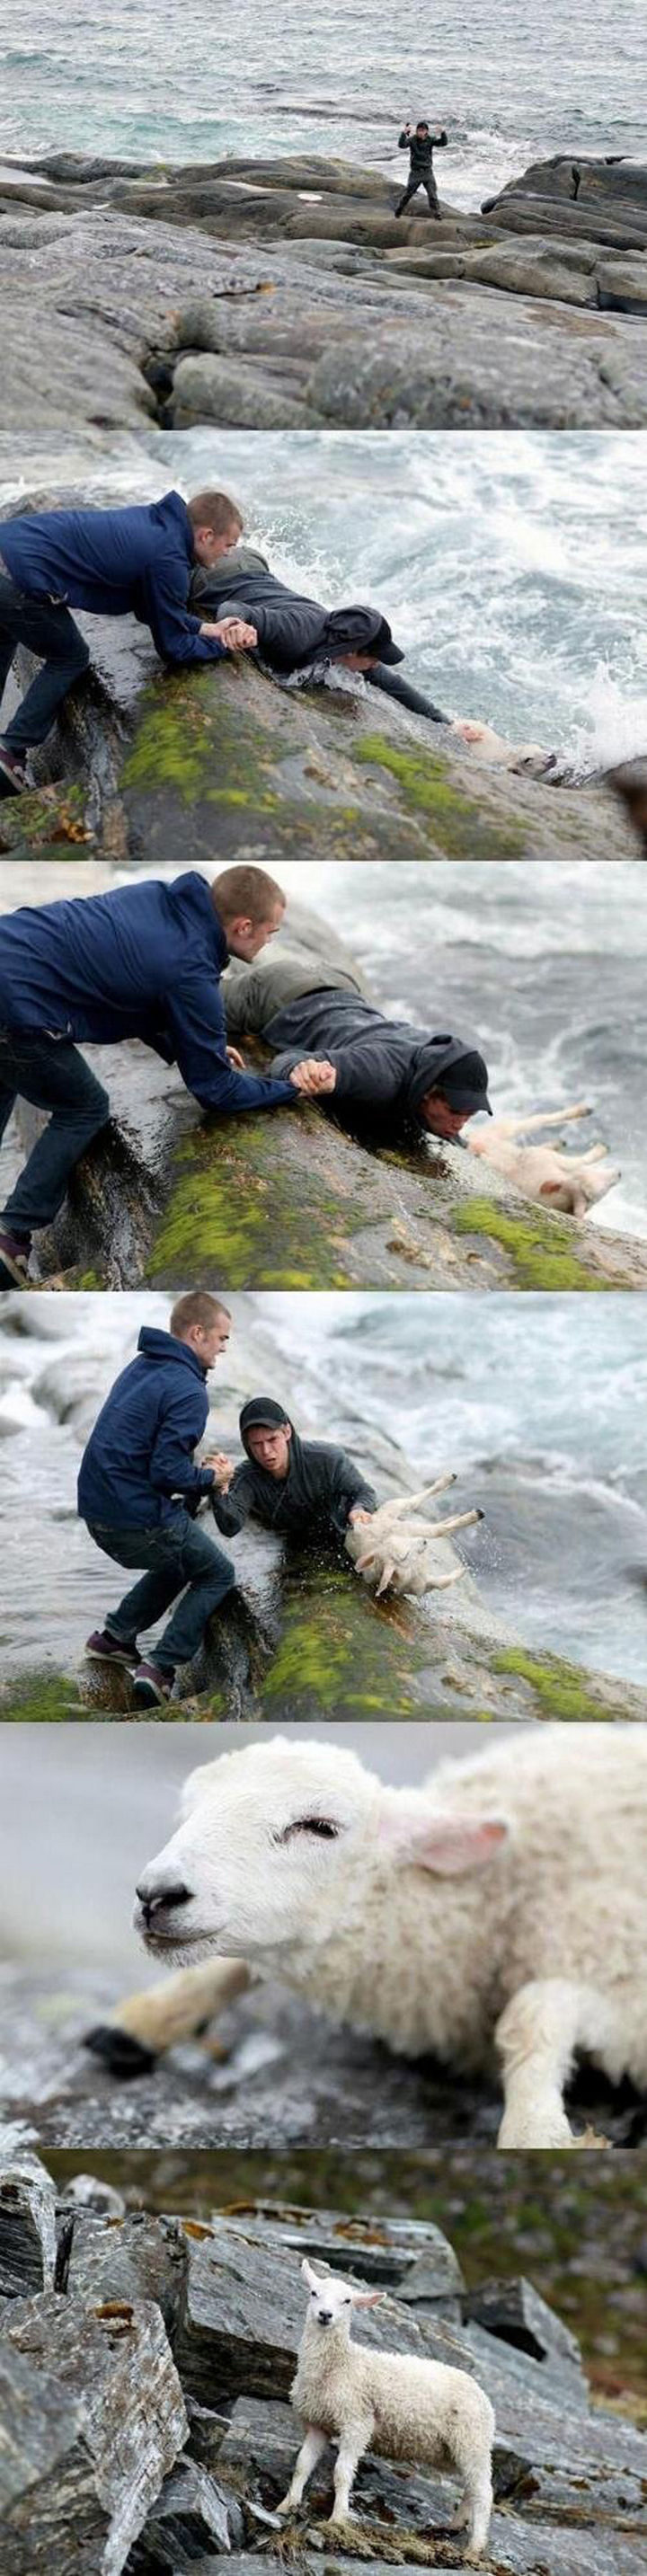 Two Norwegian guys rescuing a sheep that accidentally fell into the ocean.